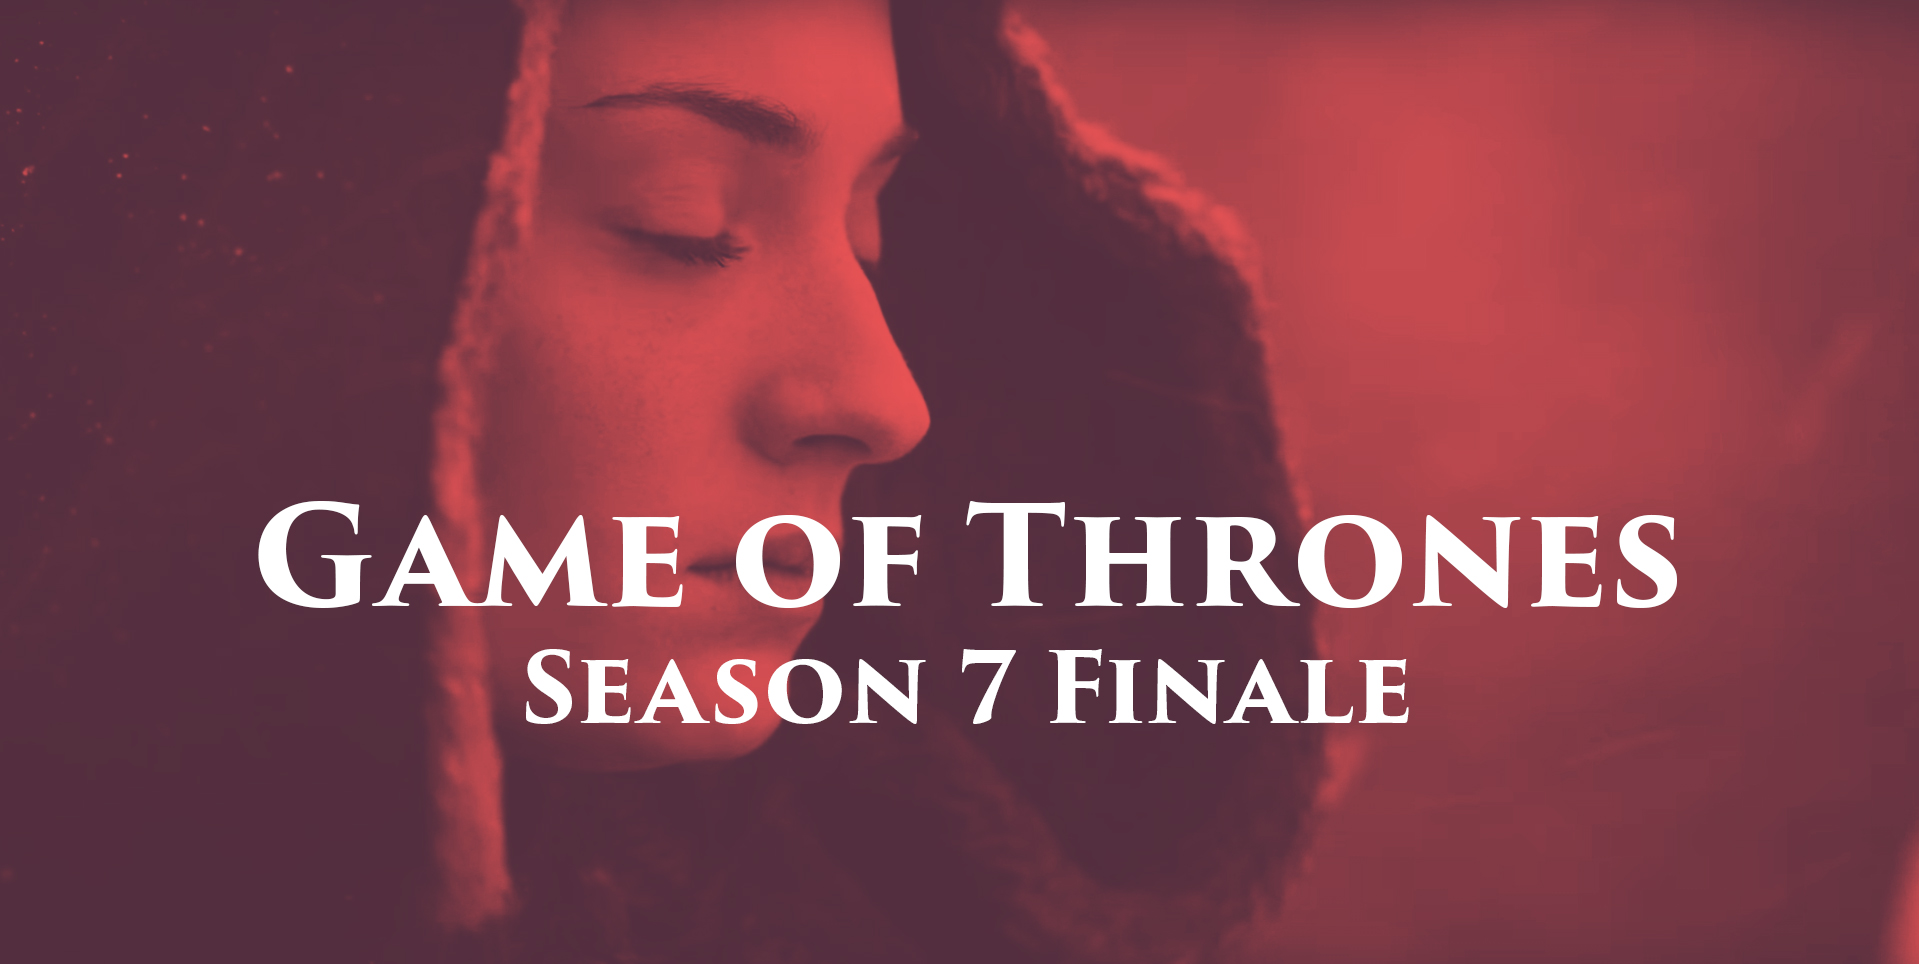  Game of Thrones S7 Finale The Dragon and the Wolf will be Longest